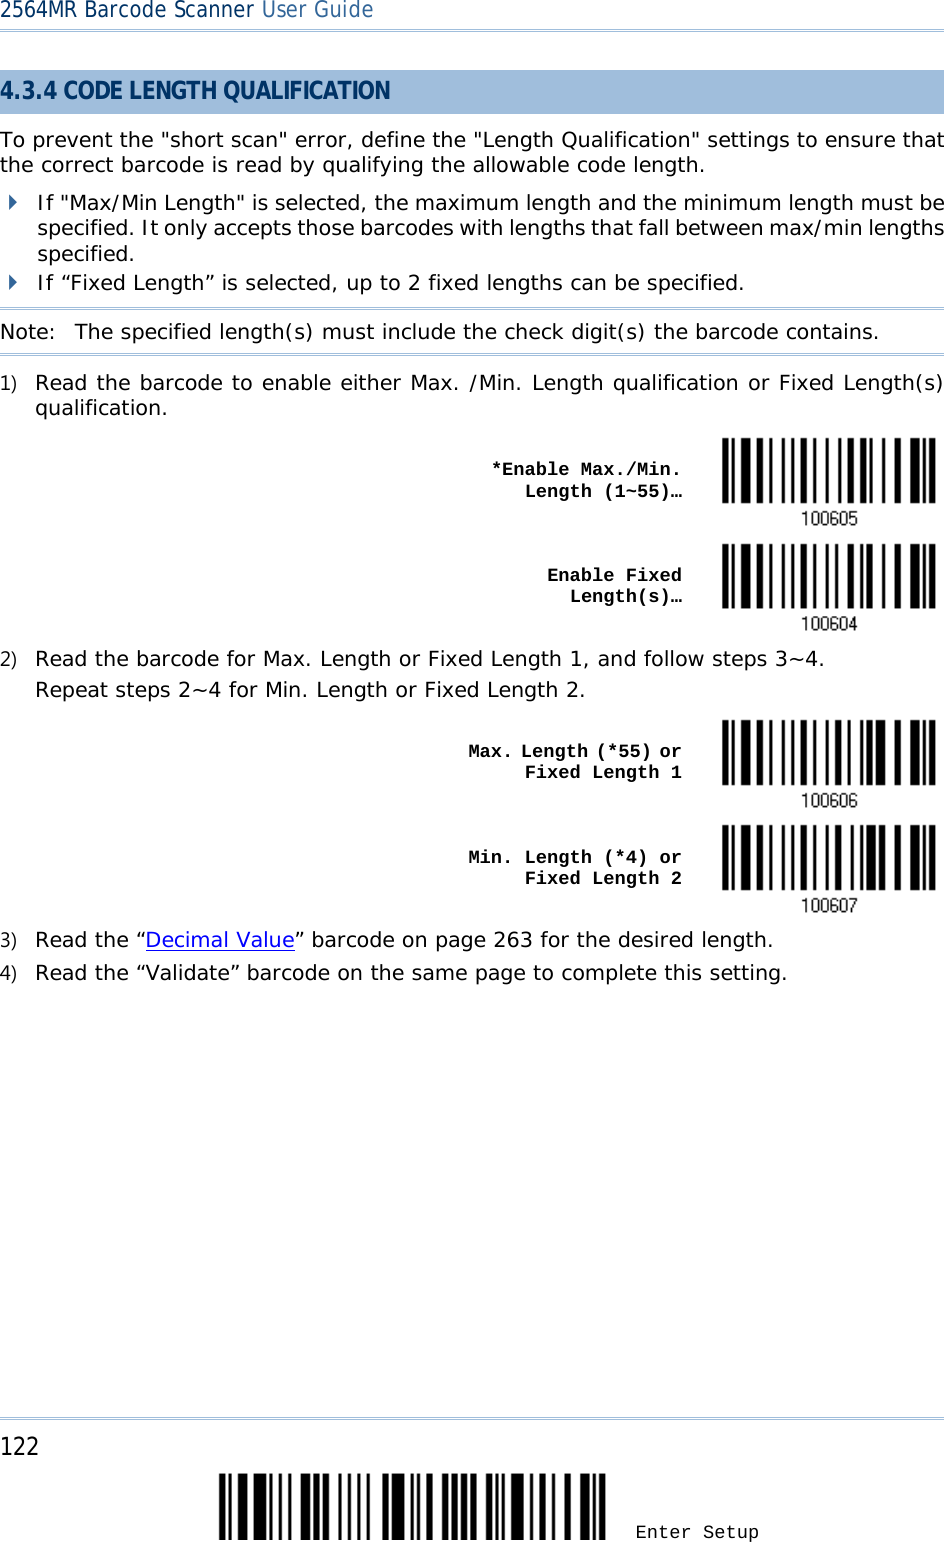 2564MR Barcode Scanner User Guide  4.3.4 CODE LENGTH QUALIFICATION To prevent the &quot;short scan&quot; error, define the &quot;Length Qualification&quot; settings to ensure that the correct barcode is read by qualifying the allowable code length.  If &quot;Max/Min Length&quot; is selected, the maximum length and the minimum length must be specified. It only accepts those barcodes with lengths that fall between max/min lengths specified.  If “Fixed Length” is selected, up to 2 fixed lengths can be specified. Note:   The specified length(s) must include the check digit(s) the barcode contains. 1) Read the barcode to enable either Max. /Min. Length qualification or Fixed Length(s) qualification.    *Enable Max./Min. Length (1~55)…     Enable Fixed Length(s)…  2) Read the barcode for Max. Length or Fixed Length 1, and follow steps 3~4. Repeat steps 2~4 for Min. Length or Fixed Length 2.    Max. Length (*55) or Fixed Length 1     Min. Length (*4) or Fixed Length 2  3) Read the “Decimal Value” barcode on page 263 for the desired length.  4) Read the “Validate” barcode on the same page to complete this setting.      122 Enter Setup 